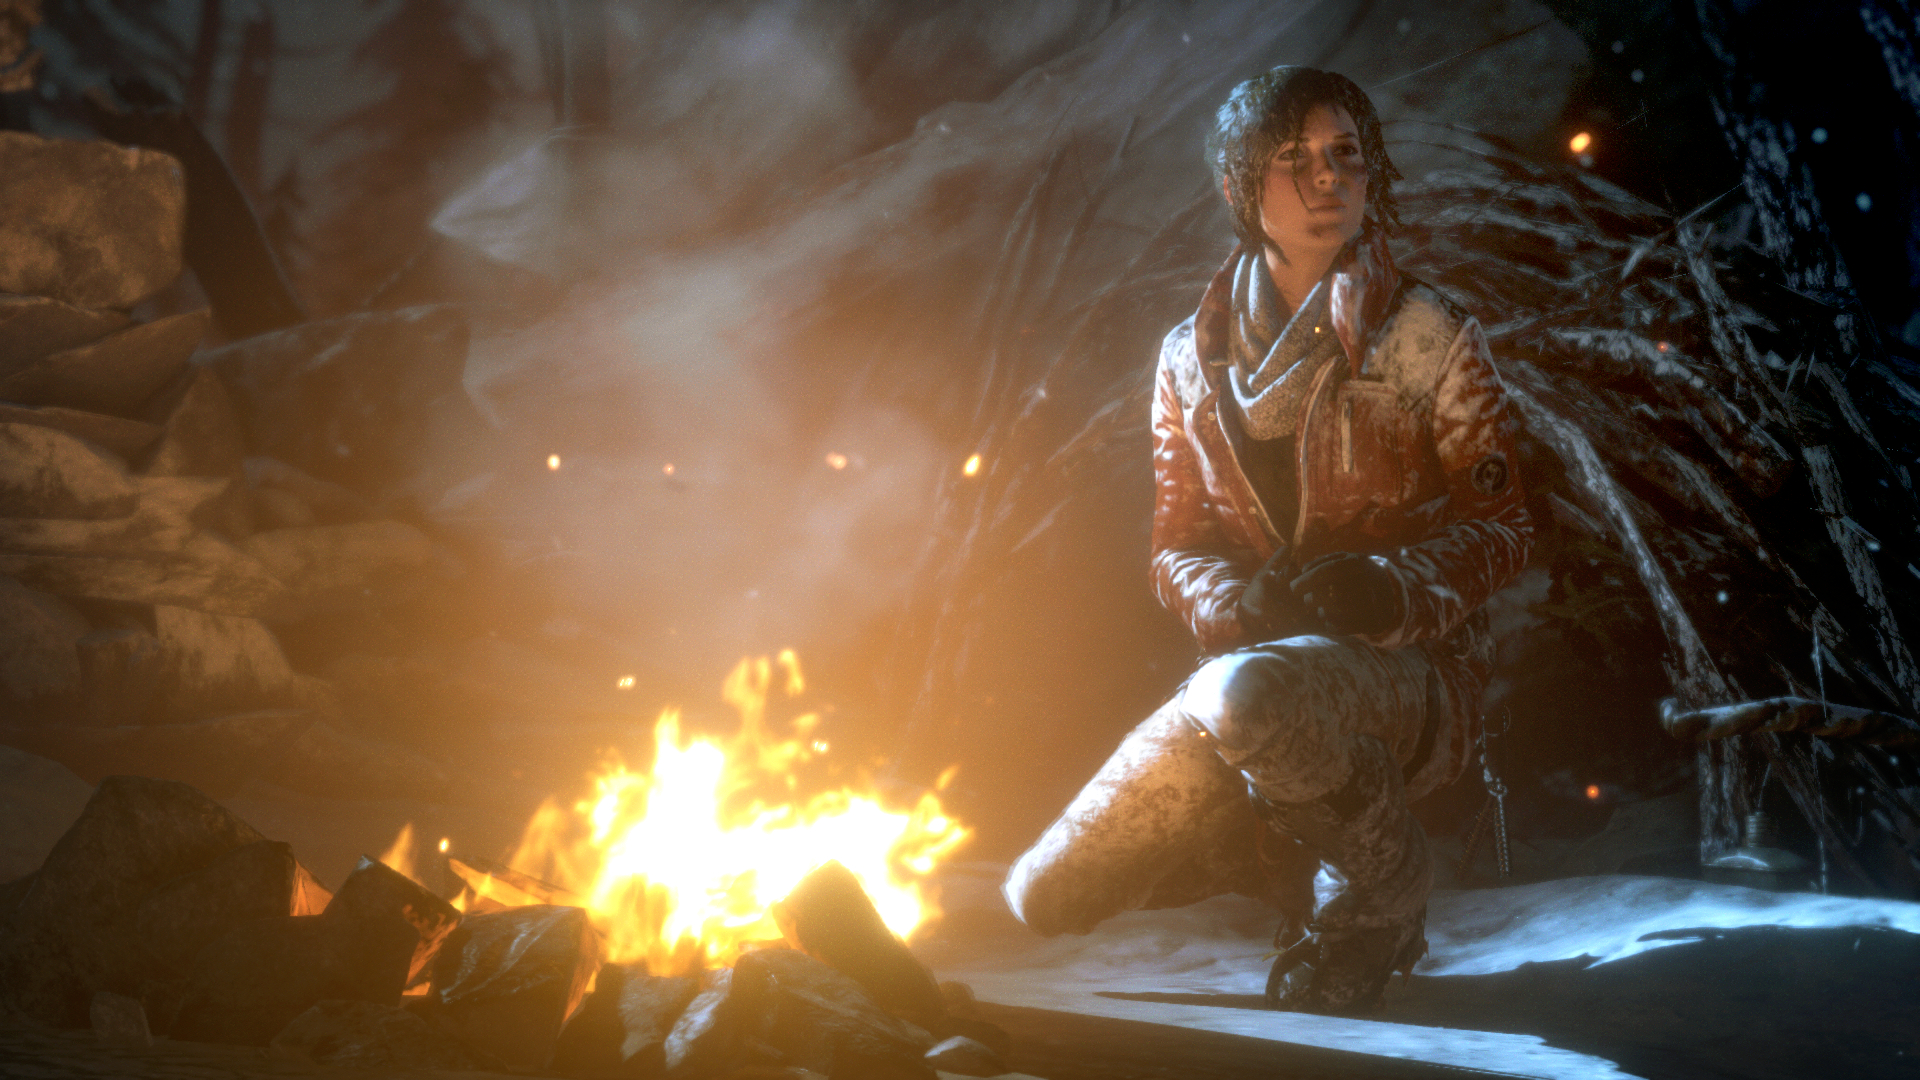 Lara warms herself in front of a campfire as she looks outward into the cold, Siberian night.